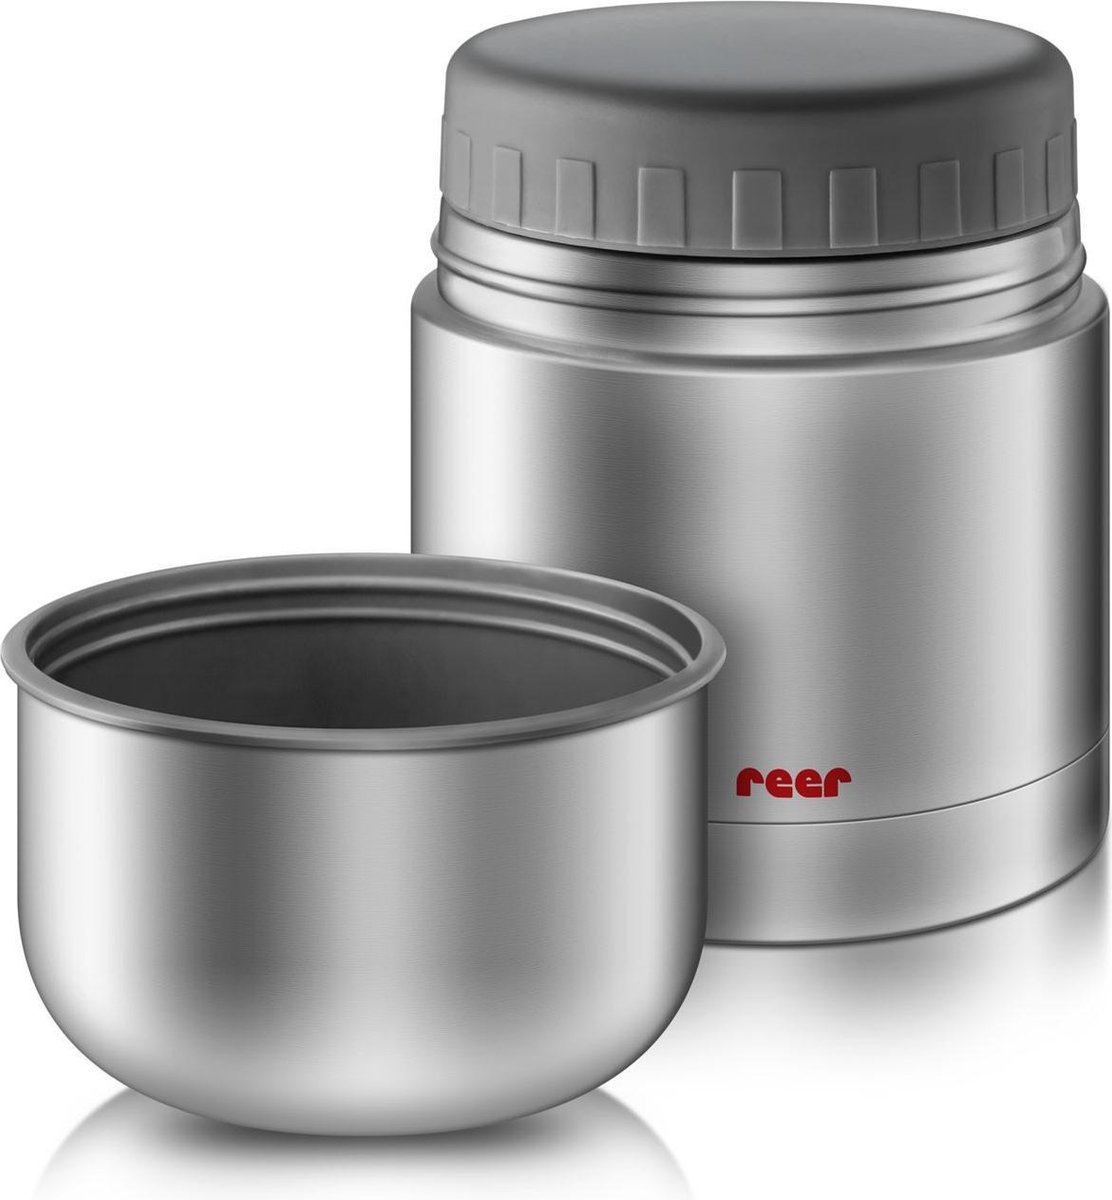 Reer Foodcontainer 90430 RVS 0,35L